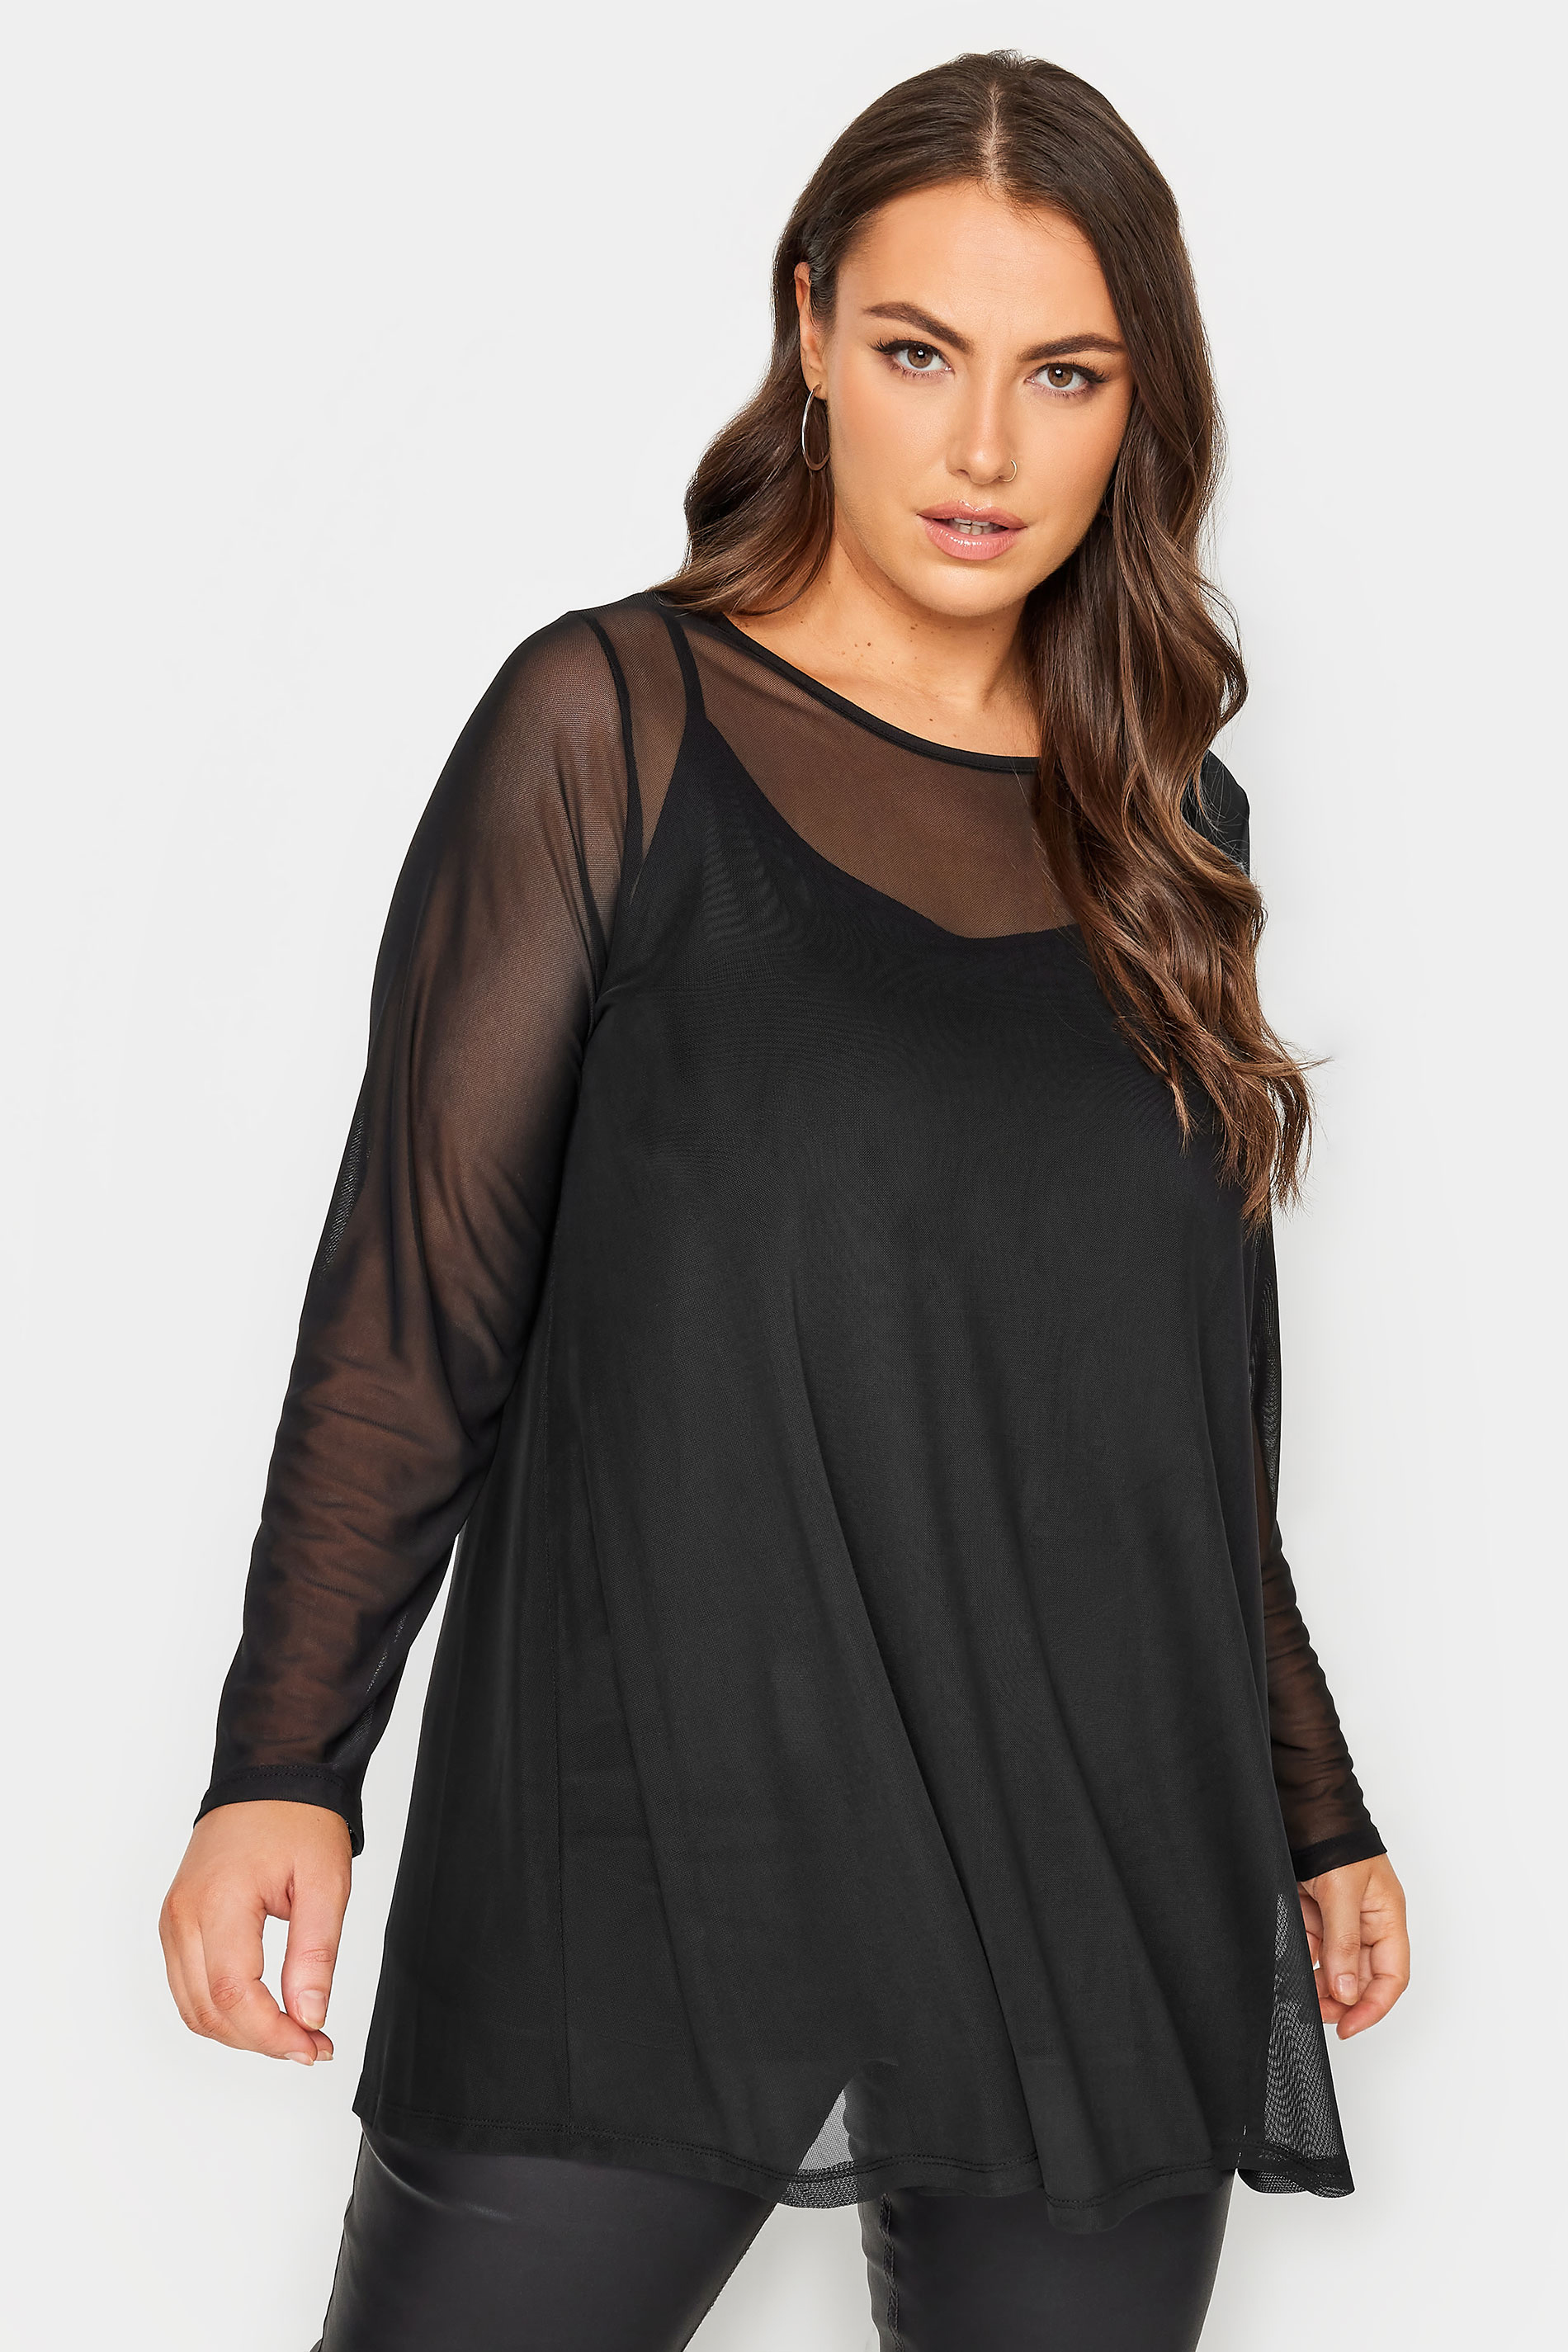 LIMITED COLLECTION Plus Size Black Mesh Swing Top | Yours Clothing 1